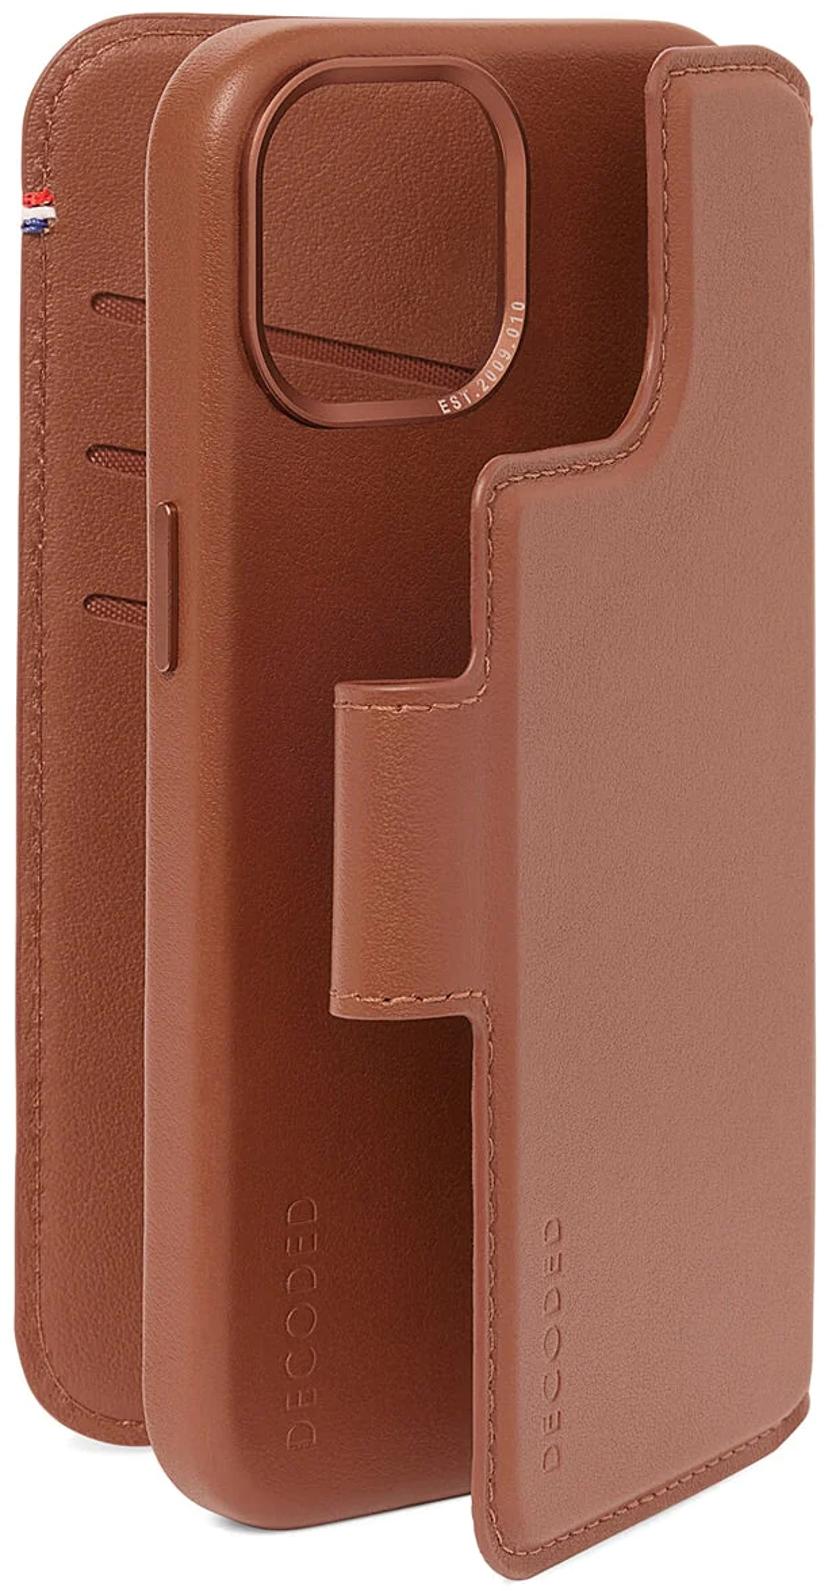 Decoded Leather Detachable Wallet iPhone 15, iPhone 14, iPhone 13 Ruskea